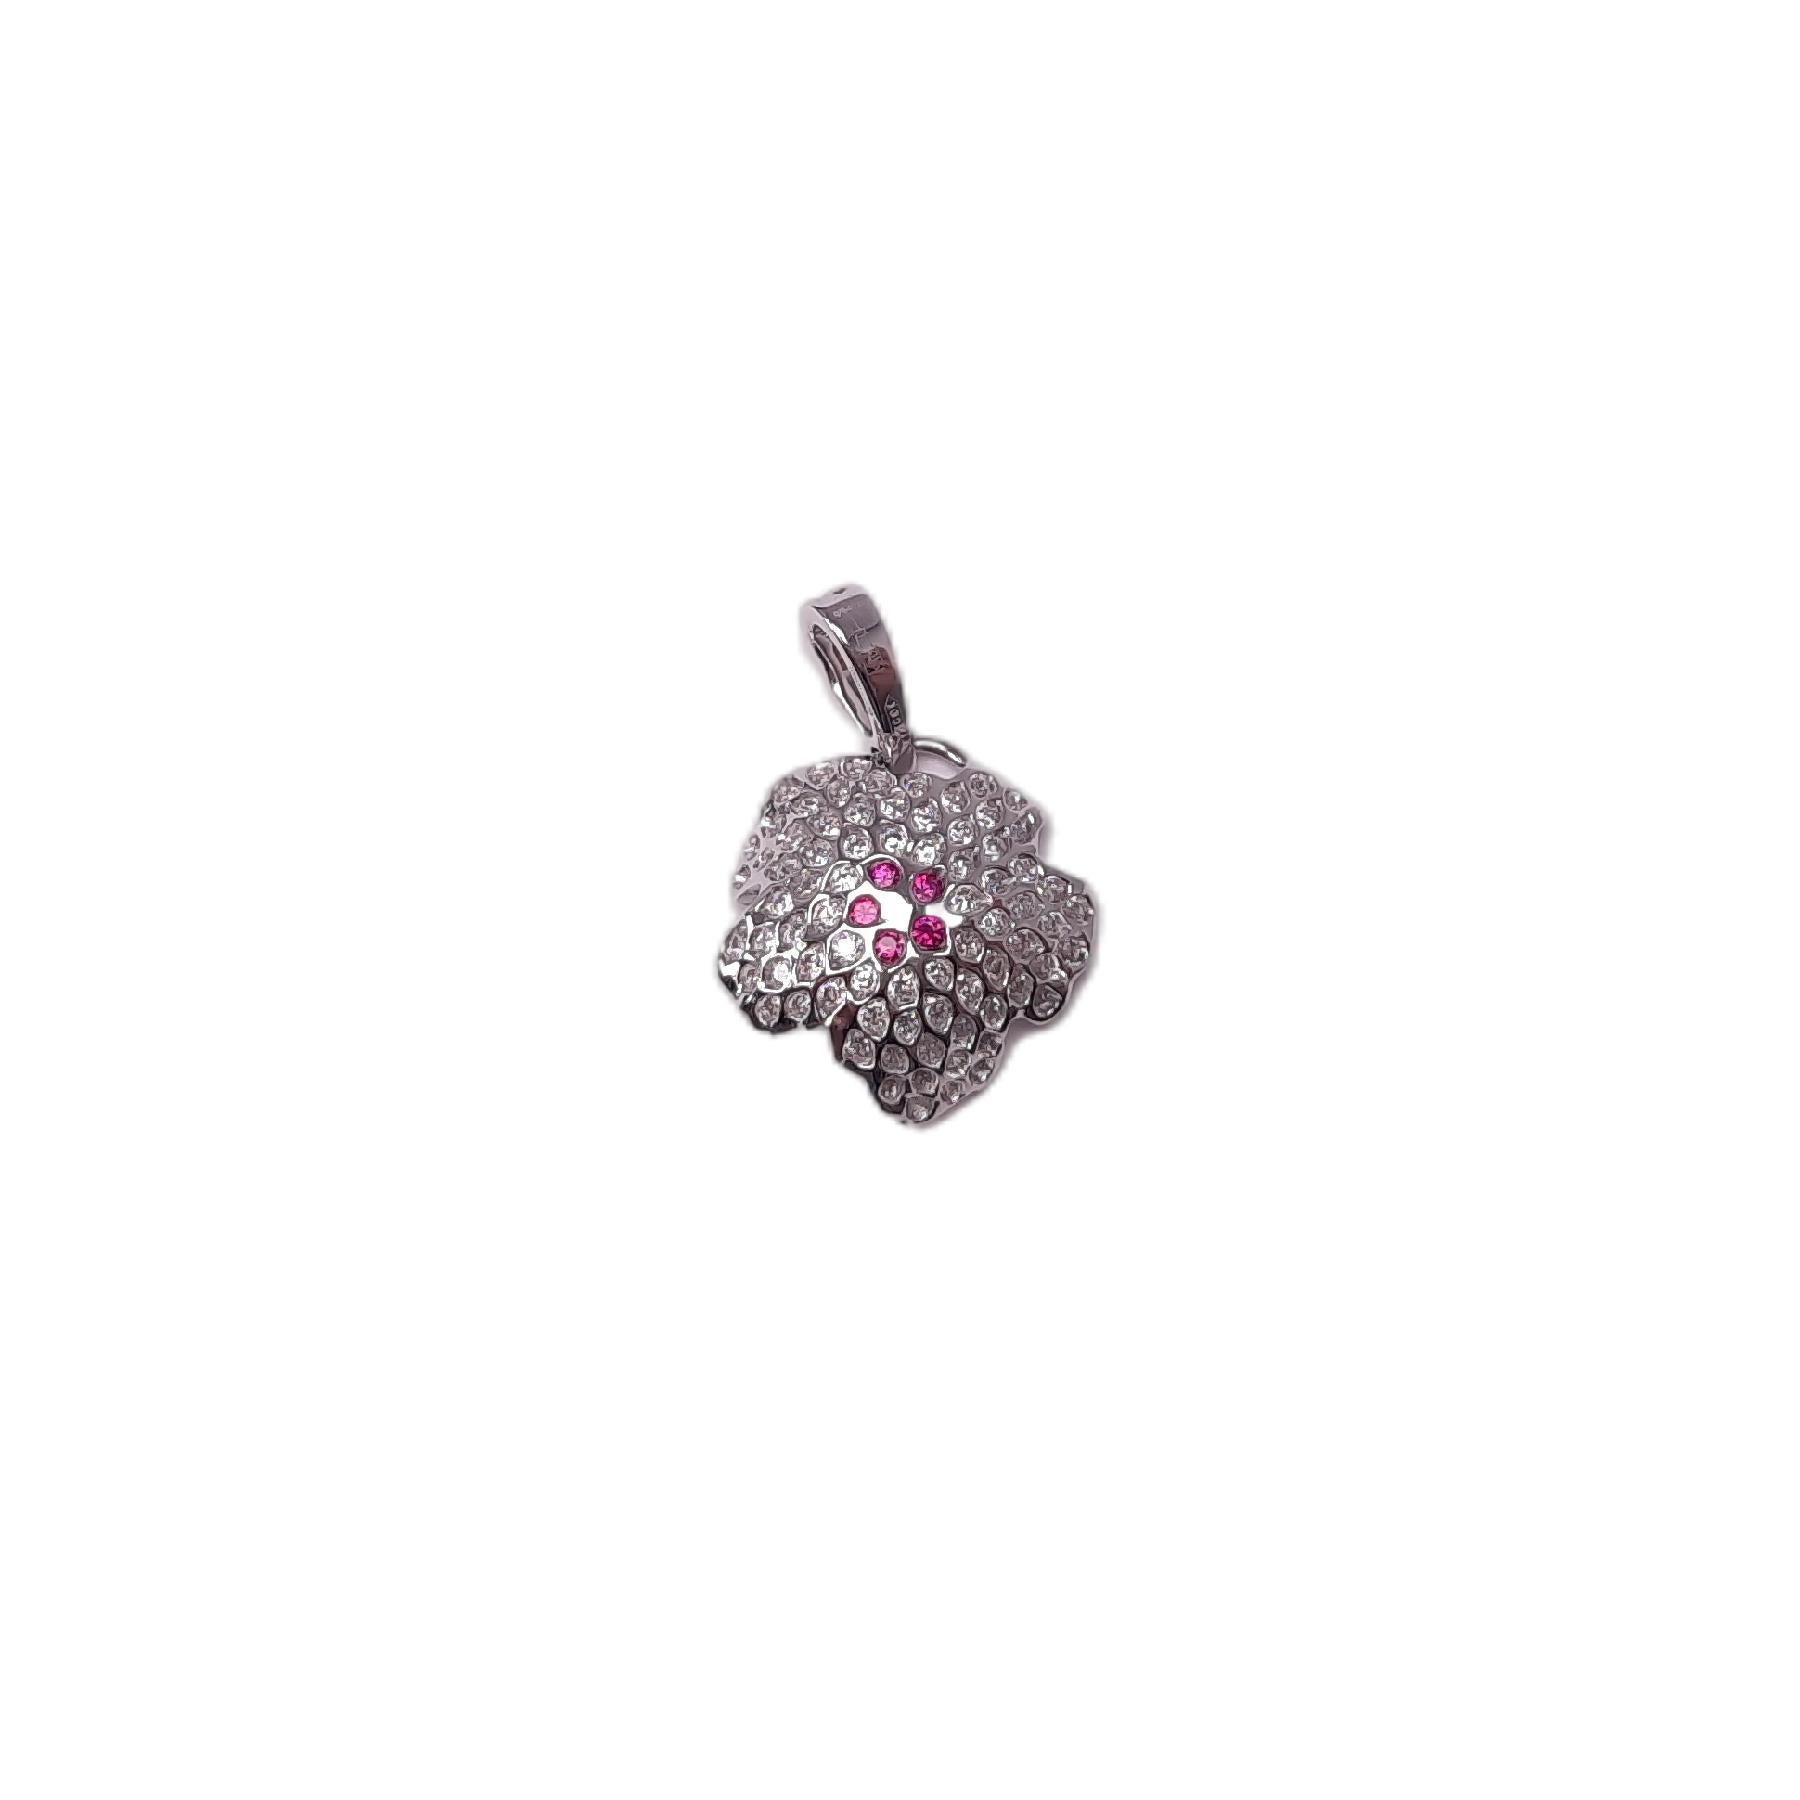 A floral pendant consisting of 18K white gold, 0.755ct diamond, 0.09ct Rubies presents your look elegantly and charmingly. The lively floral petal is embedded with inverse diamonds, which reflect the light. Rubies are also mounted inversely, shaping